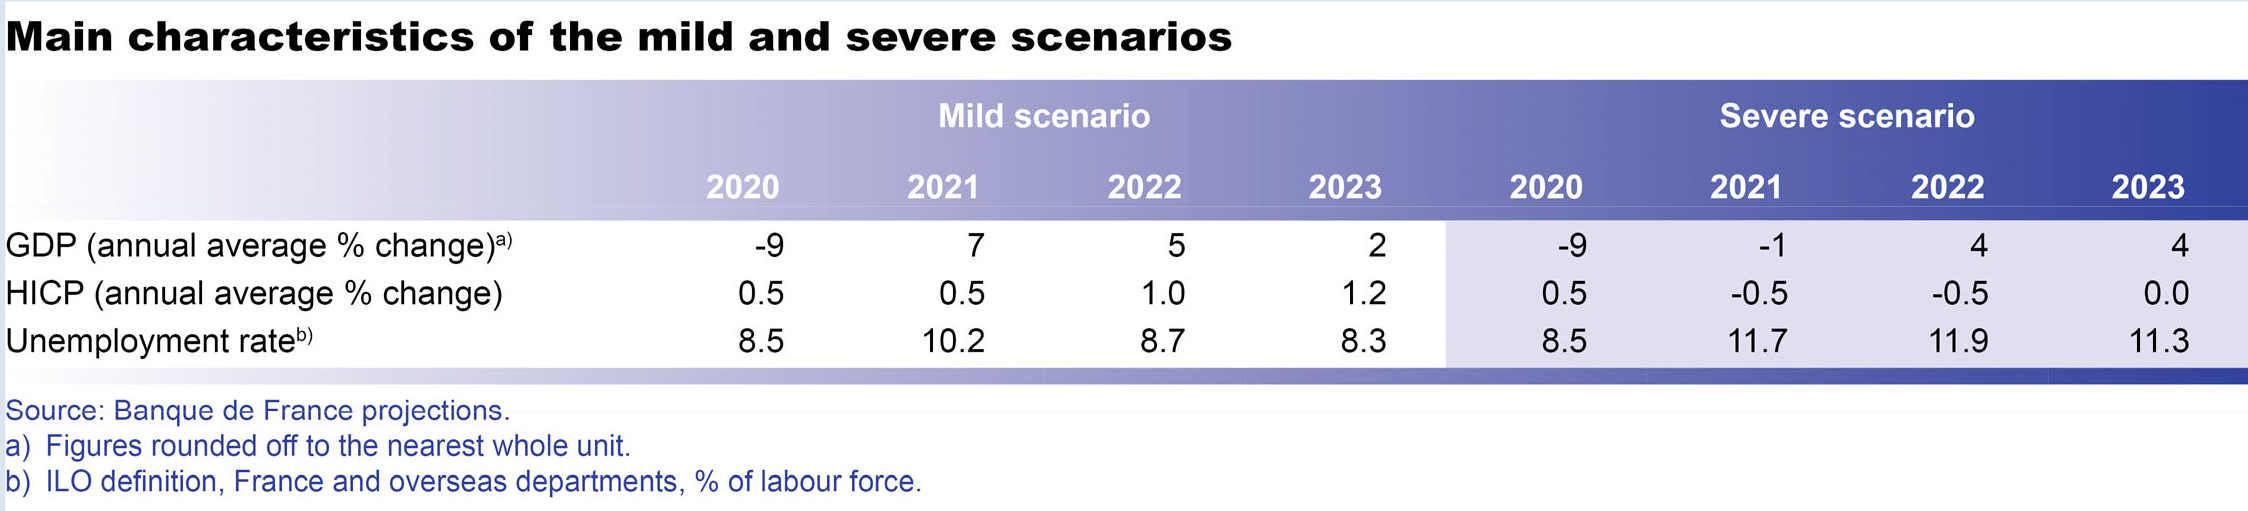 Macroeconomic projections – December 2020 - Main characteristics of the mild and severe scenarios